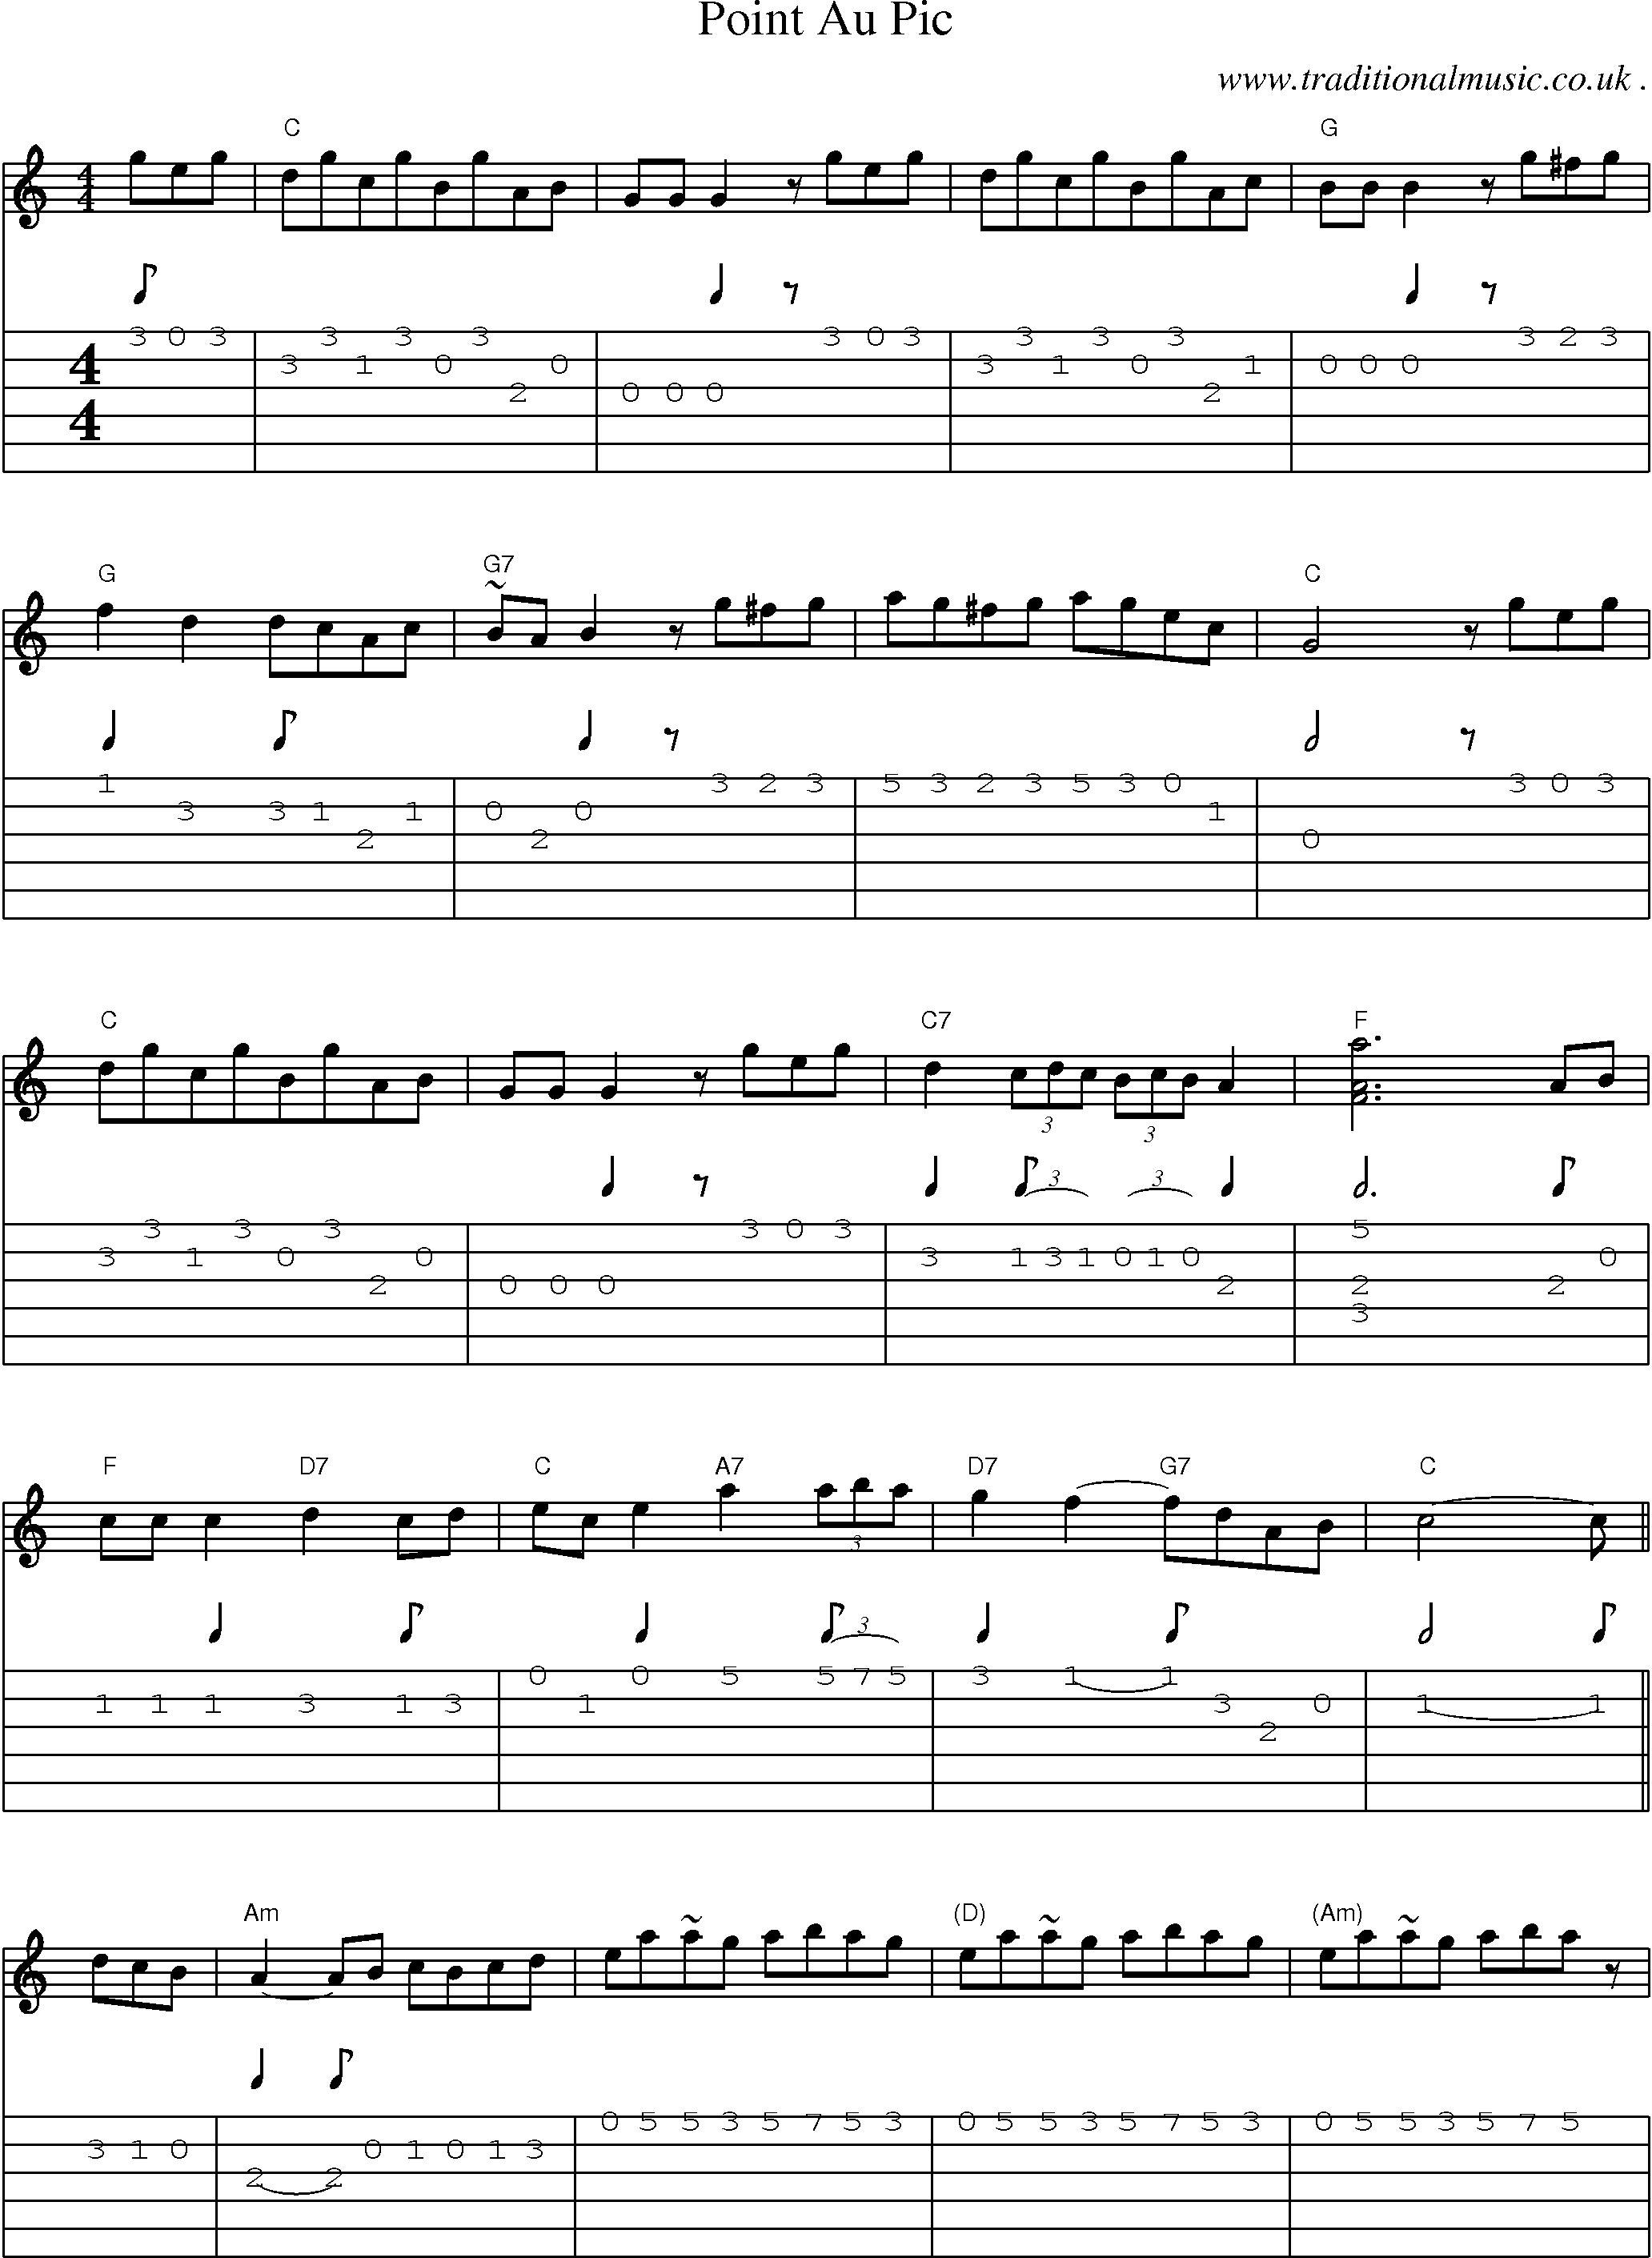 Music Score and Guitar Tabs for Point Au Pic